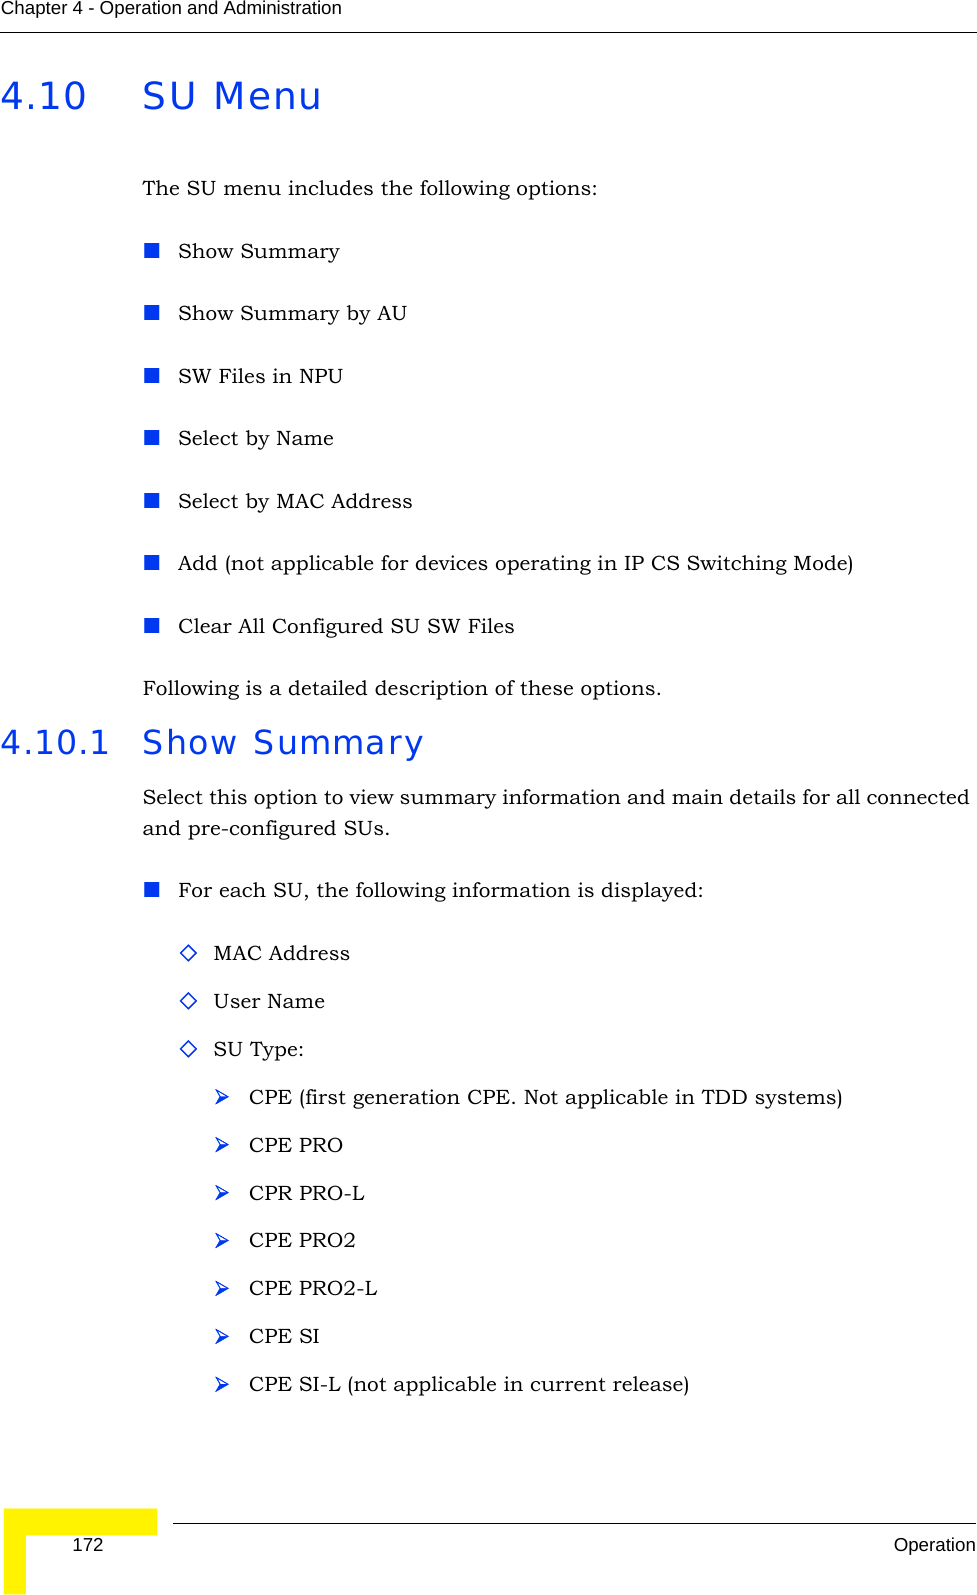  172 OperationChapter 4 - Operation and Administration4.10 SU MenuThe SU menu includes the following options:Show SummaryShow Summary by AUSW Files in NPUSelect by NameSelect by MAC AddressAdd (not applicable for devices operating in IP CS Switching Mode)Clear All Configured SU SW FilesFollowing is a detailed description of these options.4.10.1 Show SummarySelect this option to view summary information and main details for all connected and pre-configured SUs. For each SU, the following information is displayed:MAC AddressUser NameSU Type: ¾CPE (first generation CPE. Not applicable in TDD systems)¾CPE PRO¾CPR PRO-L¾CPE PRO2¾CPE PRO2-L¾CPE SI¾CPE SI-L (not applicable in current release)